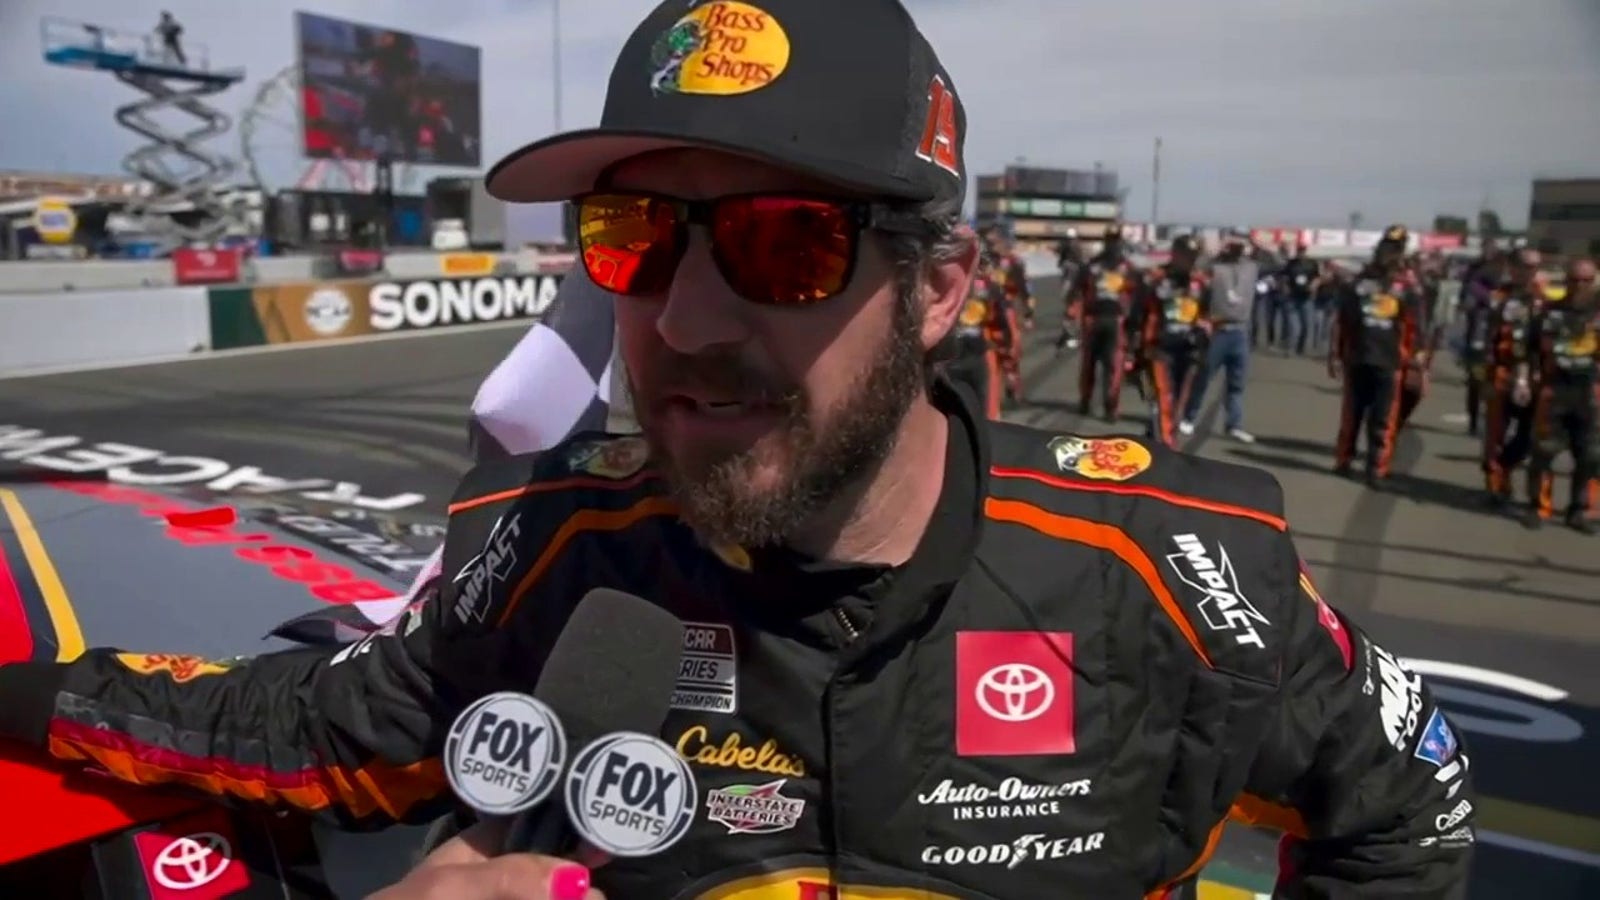 'Just feels incredible to have a day like that!' - Martin Truex Jr. talks about his emotions after winning the NASCAR Toyota/Save Mart 350